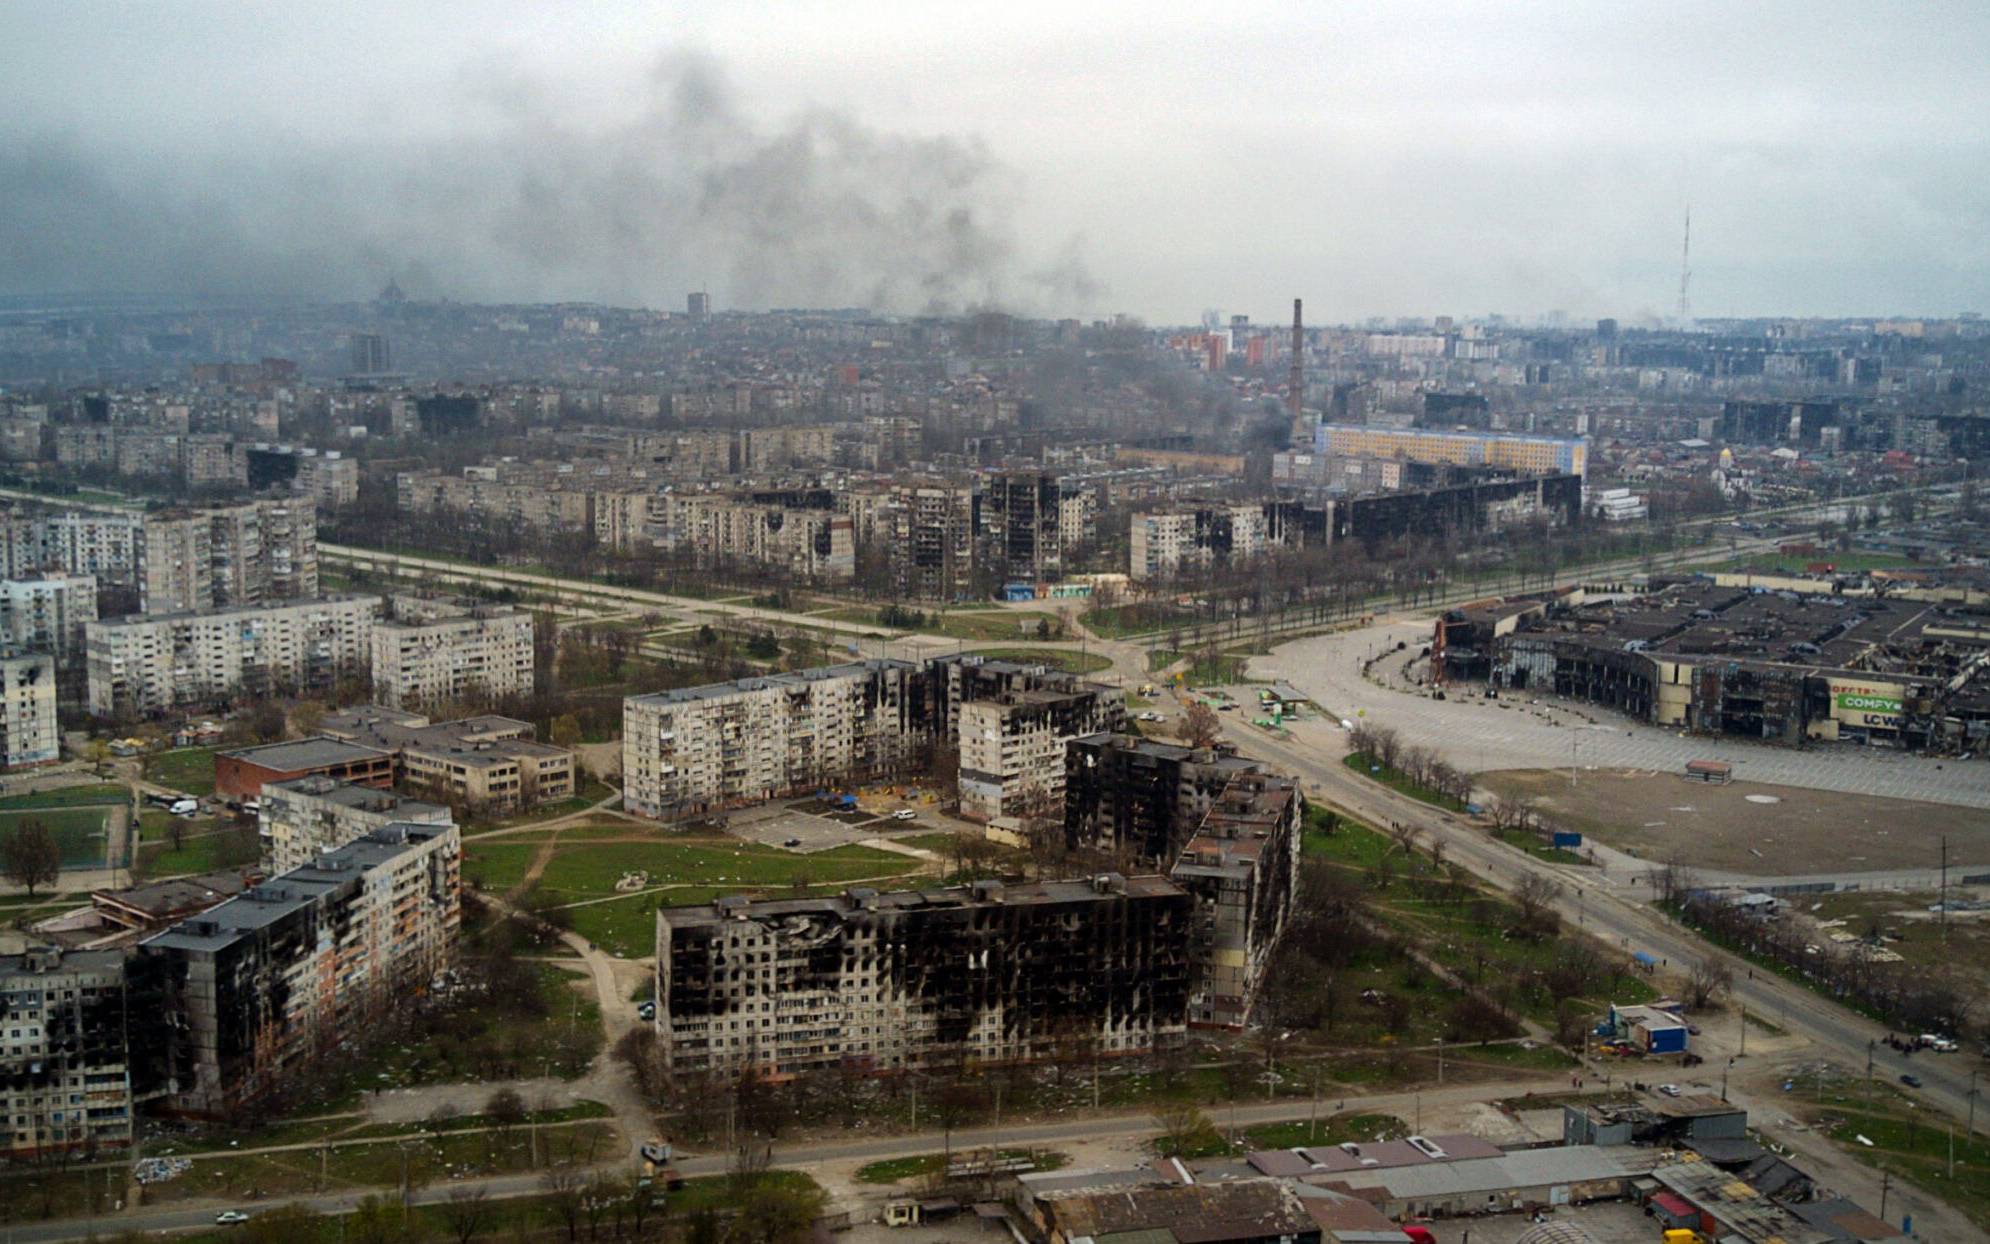 An aerial view taken on April 12, 2022, shows the city of Mariupol, during Russia's military invasion launched on Ukraine. - Russian troops on April 12 intensified their campaign to take the port city of Mariupol, part of an anticipated massive onslaught across eastern Ukraine, as the Russian president made a defiant case for the war on Russia's neighbour. (Photo by Andrey BORODULIN / AFP)